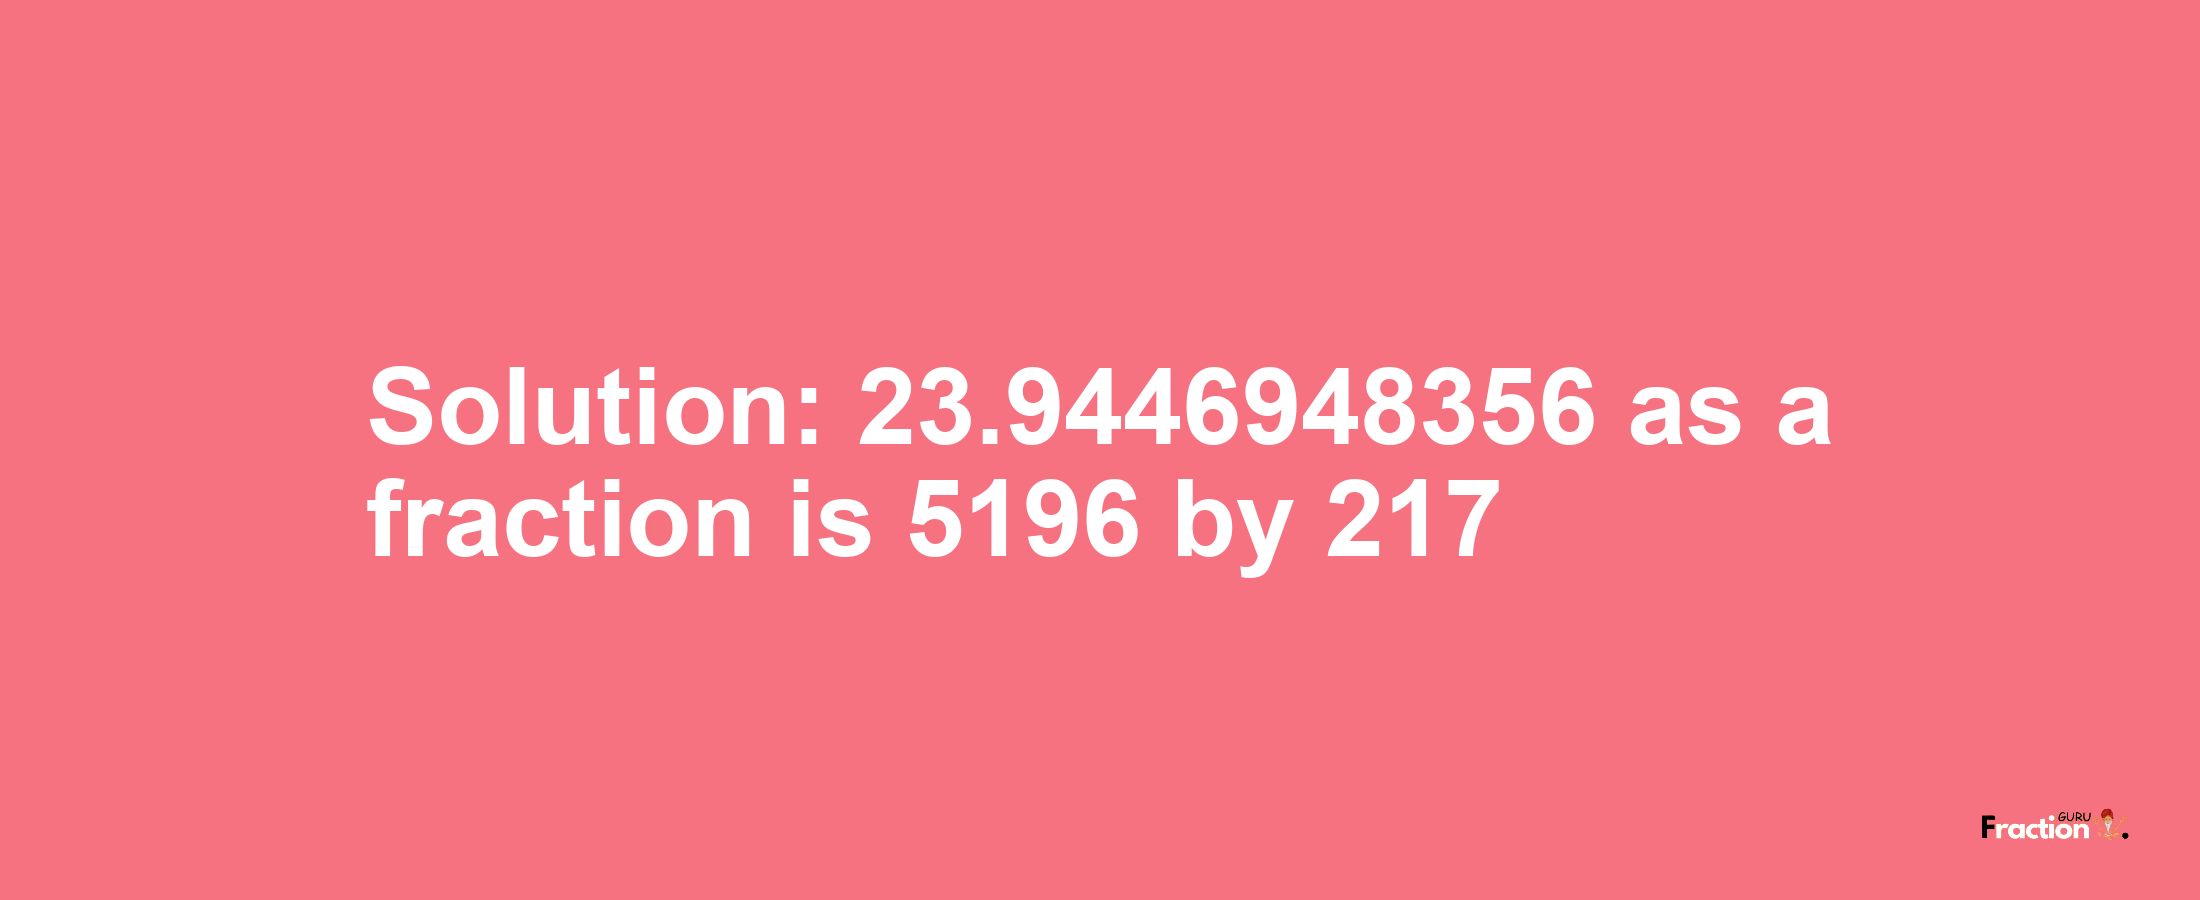 Solution:23.9446948356 as a fraction is 5196/217